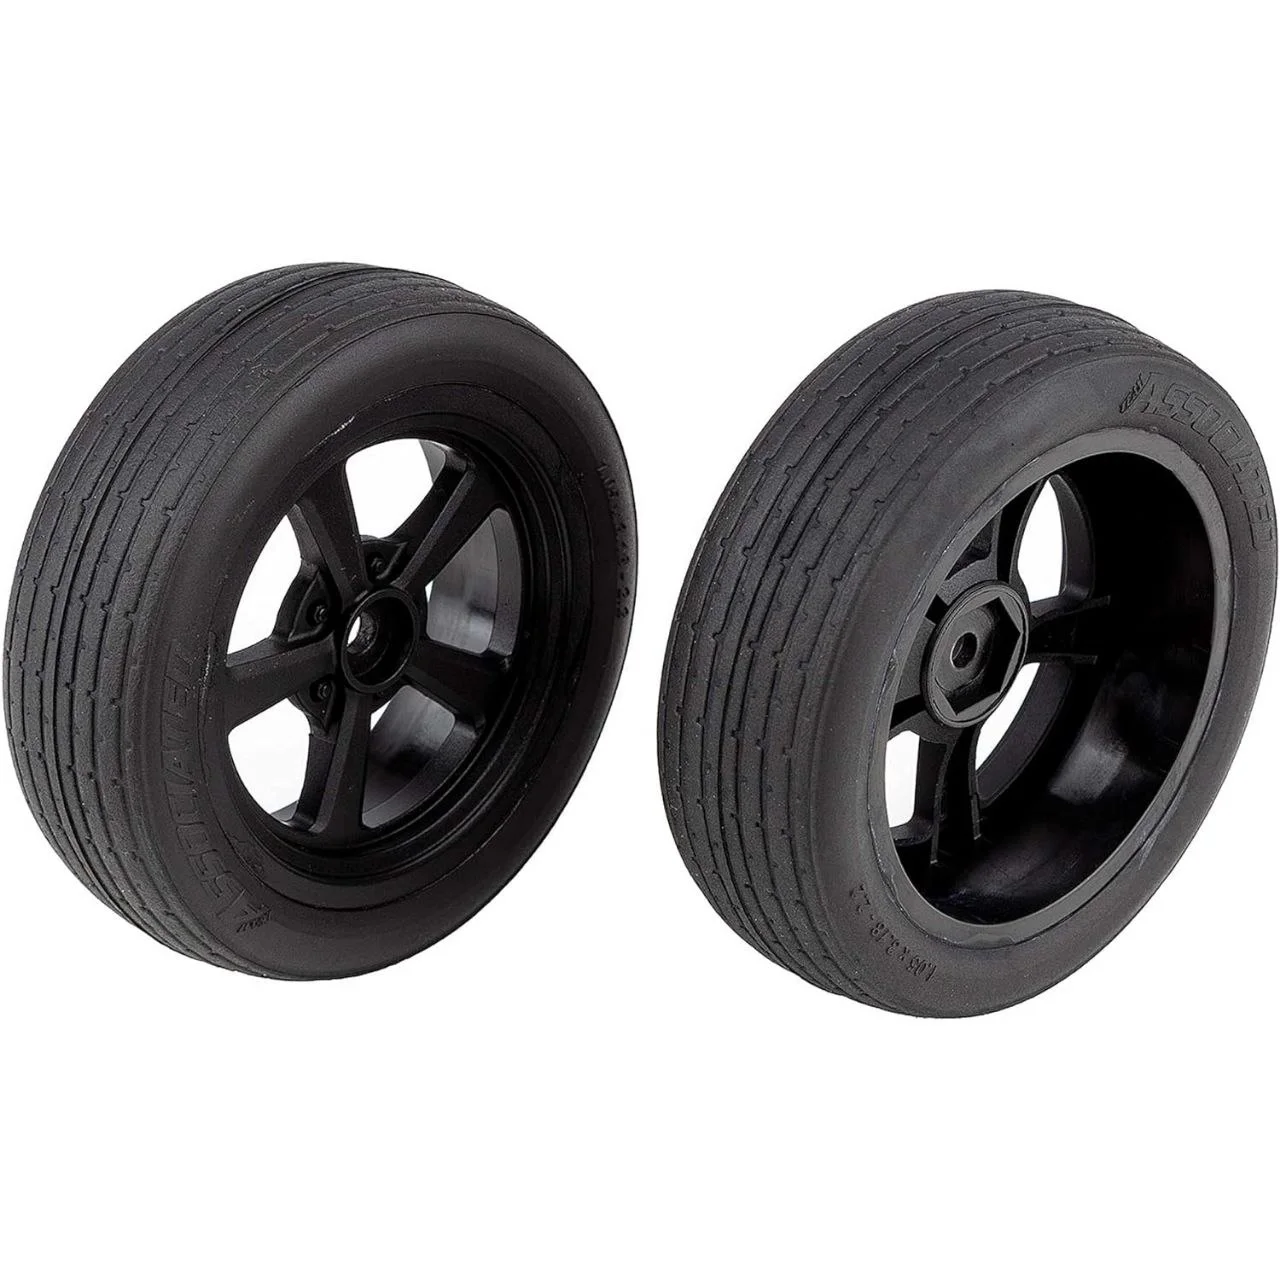 Narcev_dr10_front_wheels_and_drag_tires